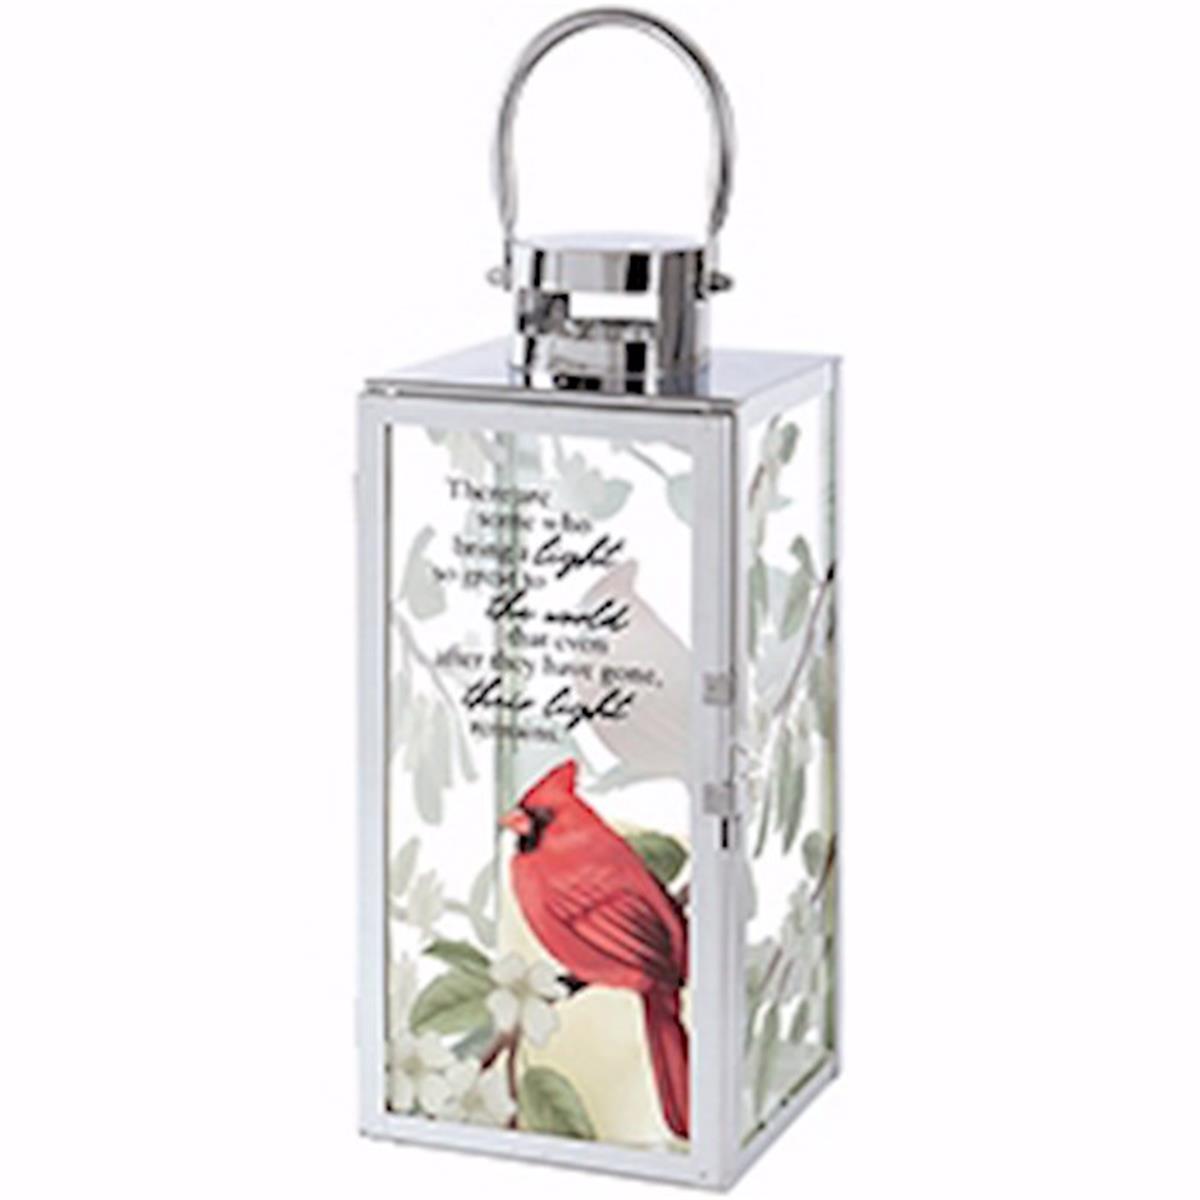 Picture of Carson Home Accents 252883 12 x 5 x 5 in. Light Remains Lantern with LED Candle & Timer